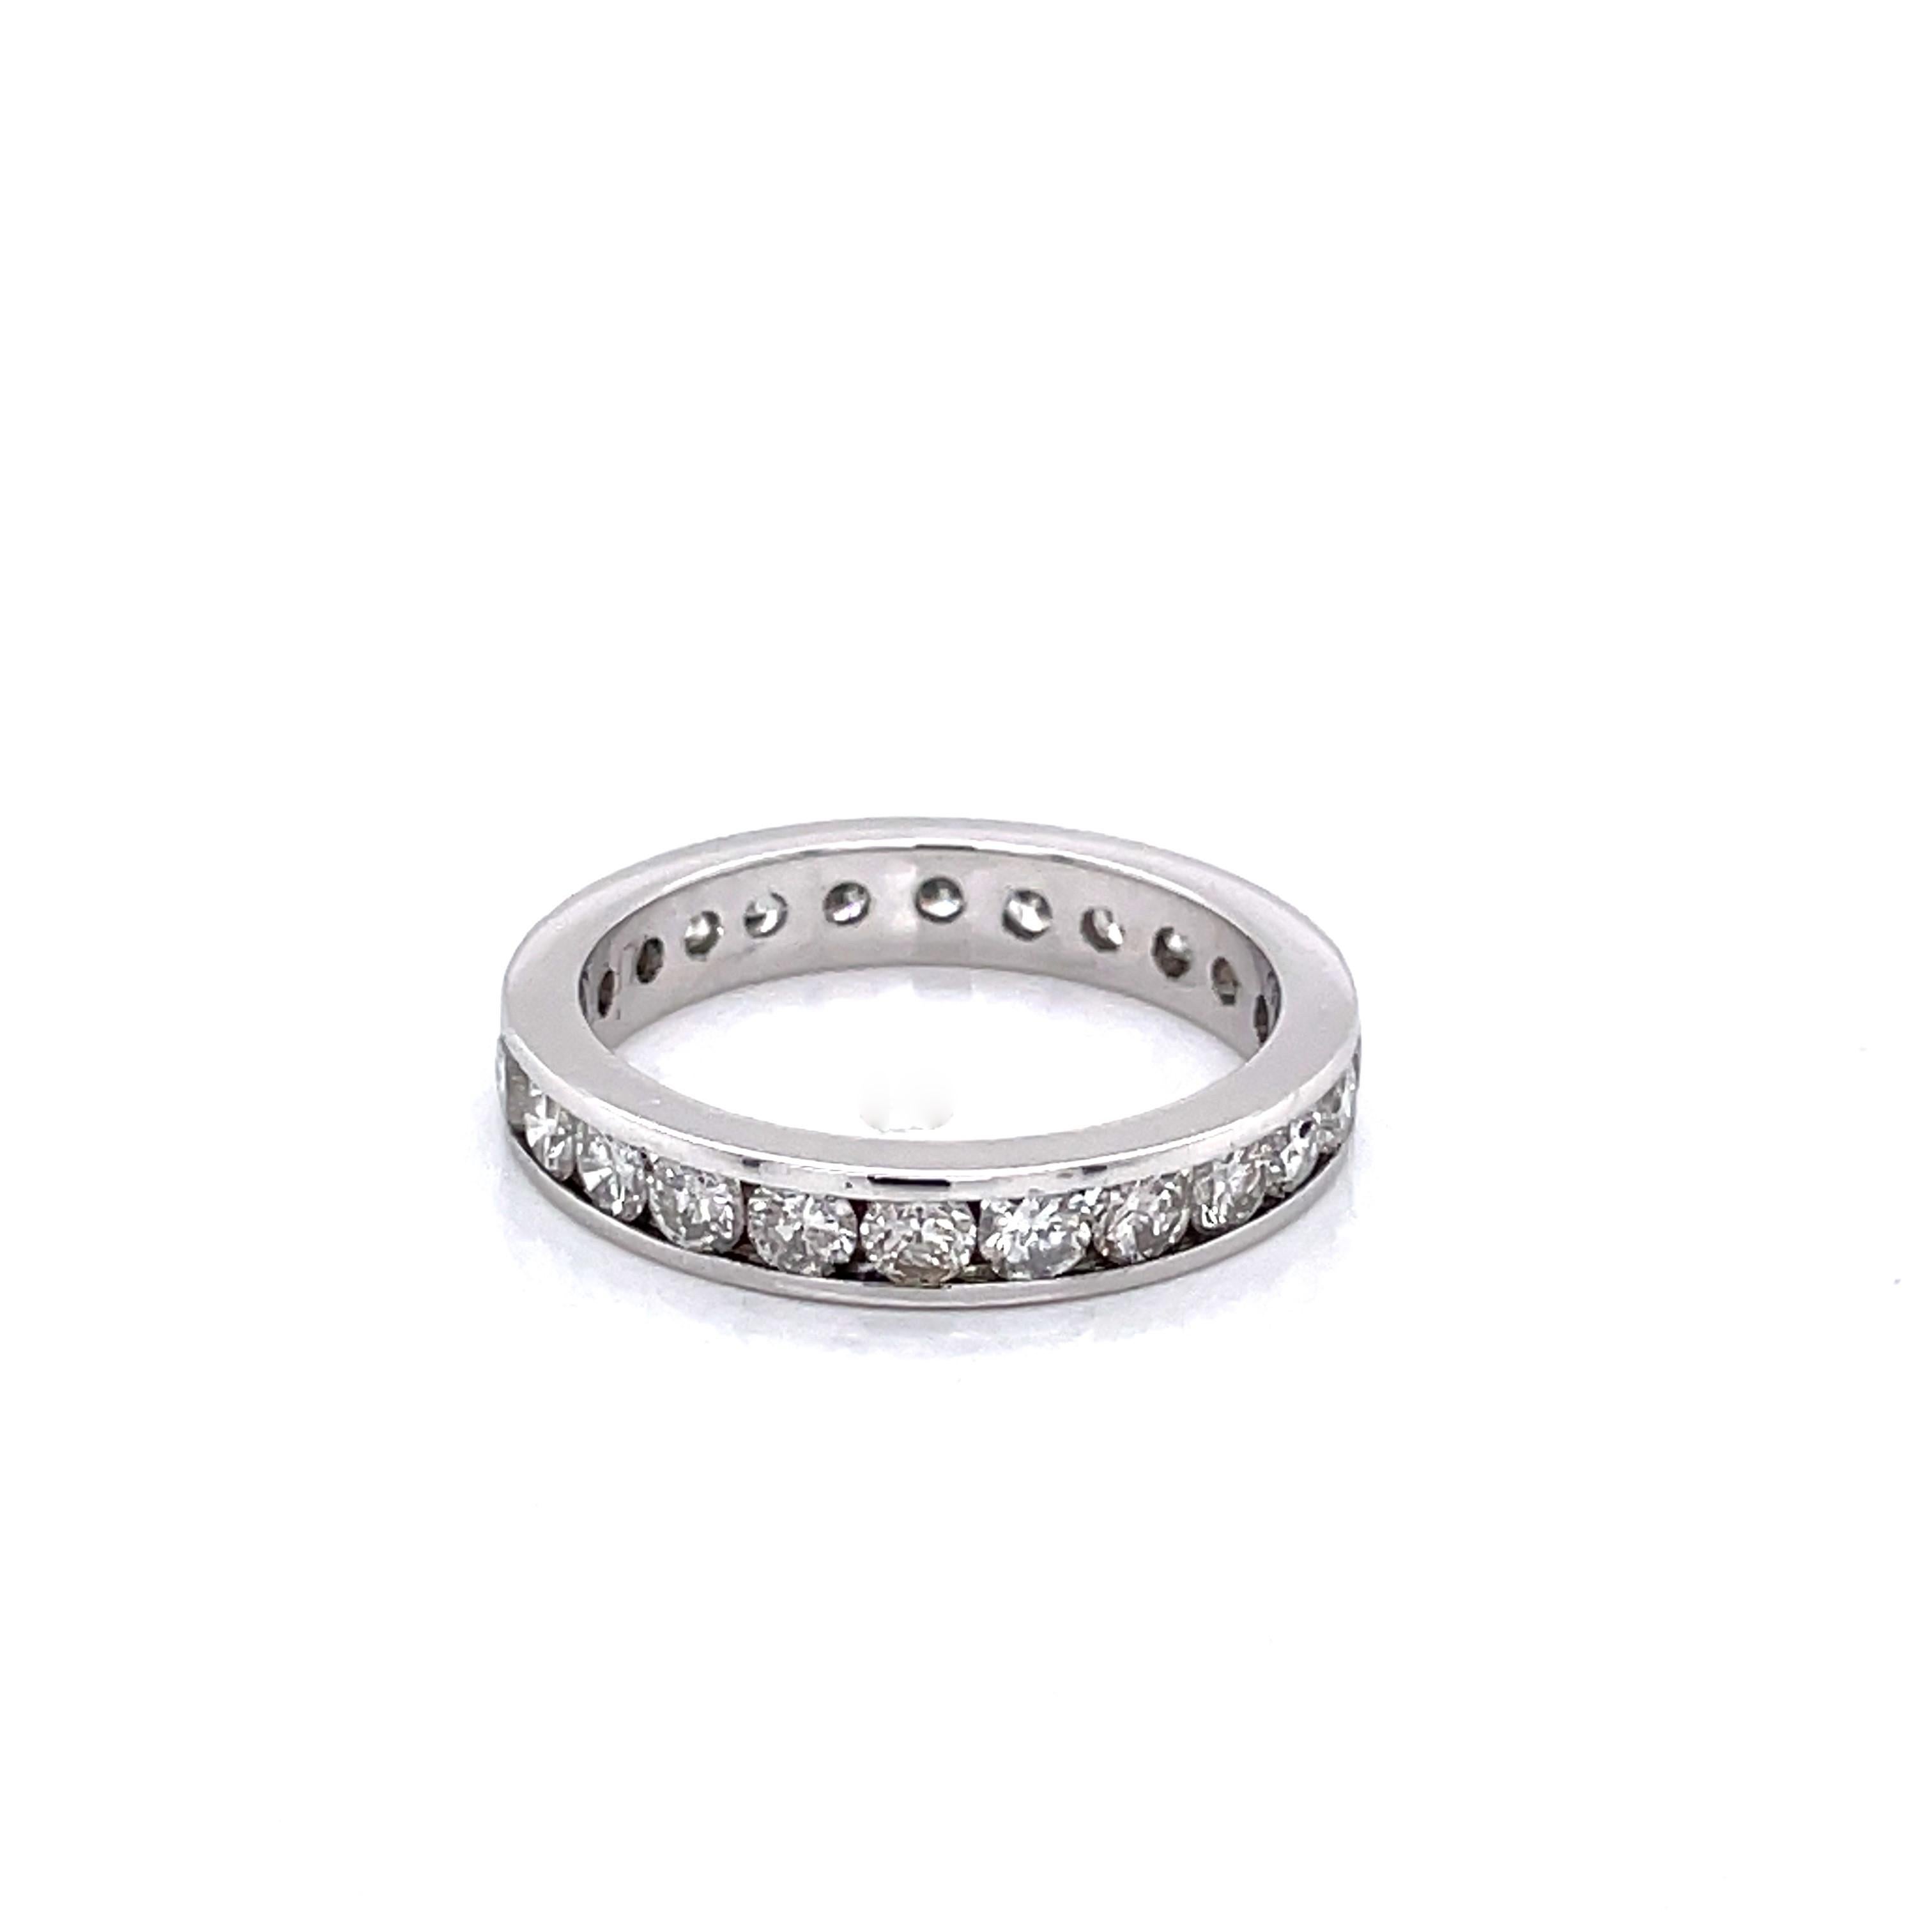 Diamond Platinum Eternity Band Ring In Good Condition For Sale In Mount Kisco, NY